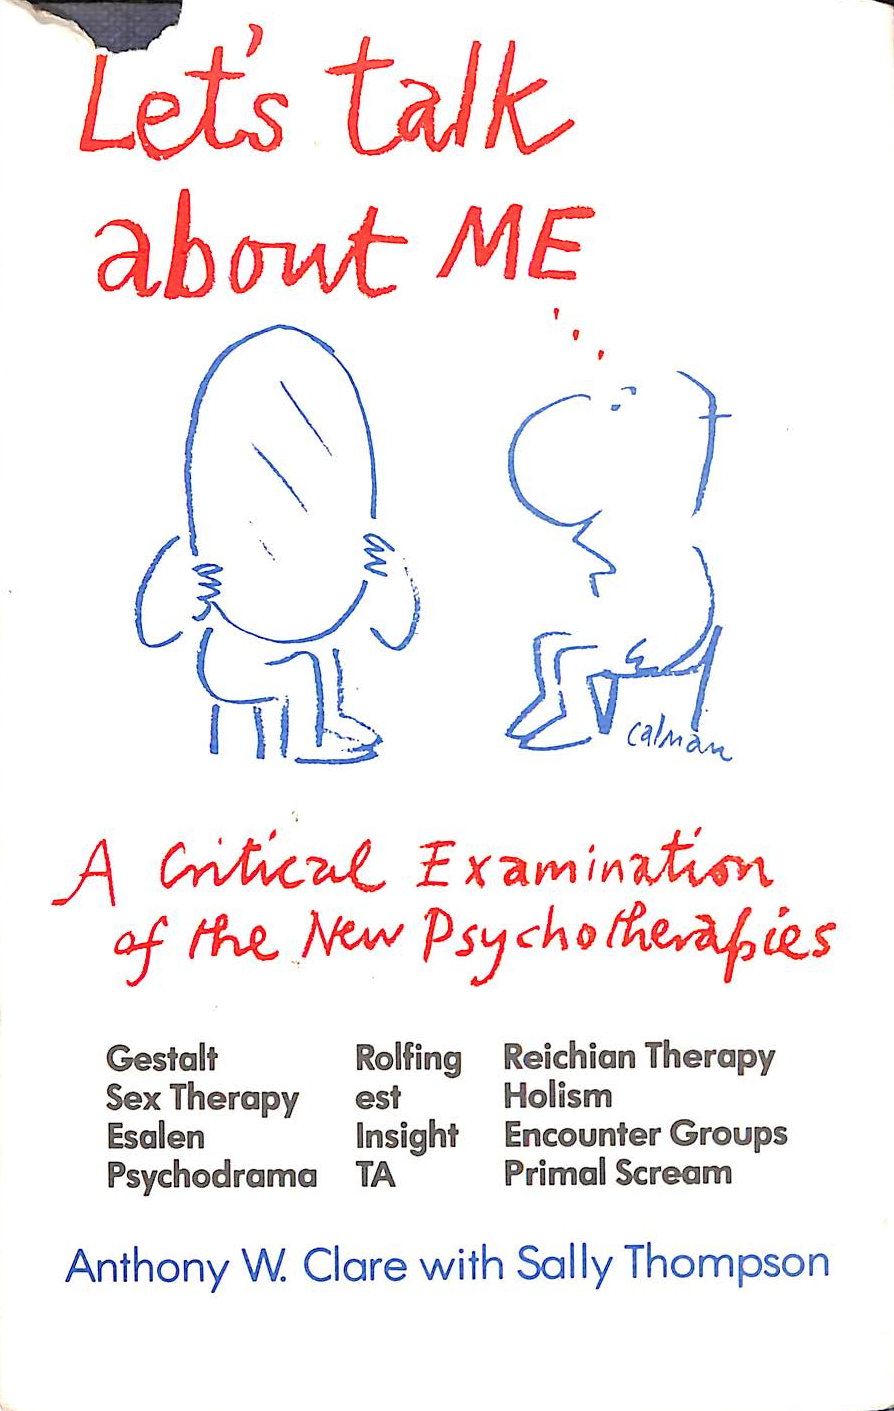 AW CLARE, S THOMPSON - Let's Talk About Me: Critical Examination of the New Psychotherapies